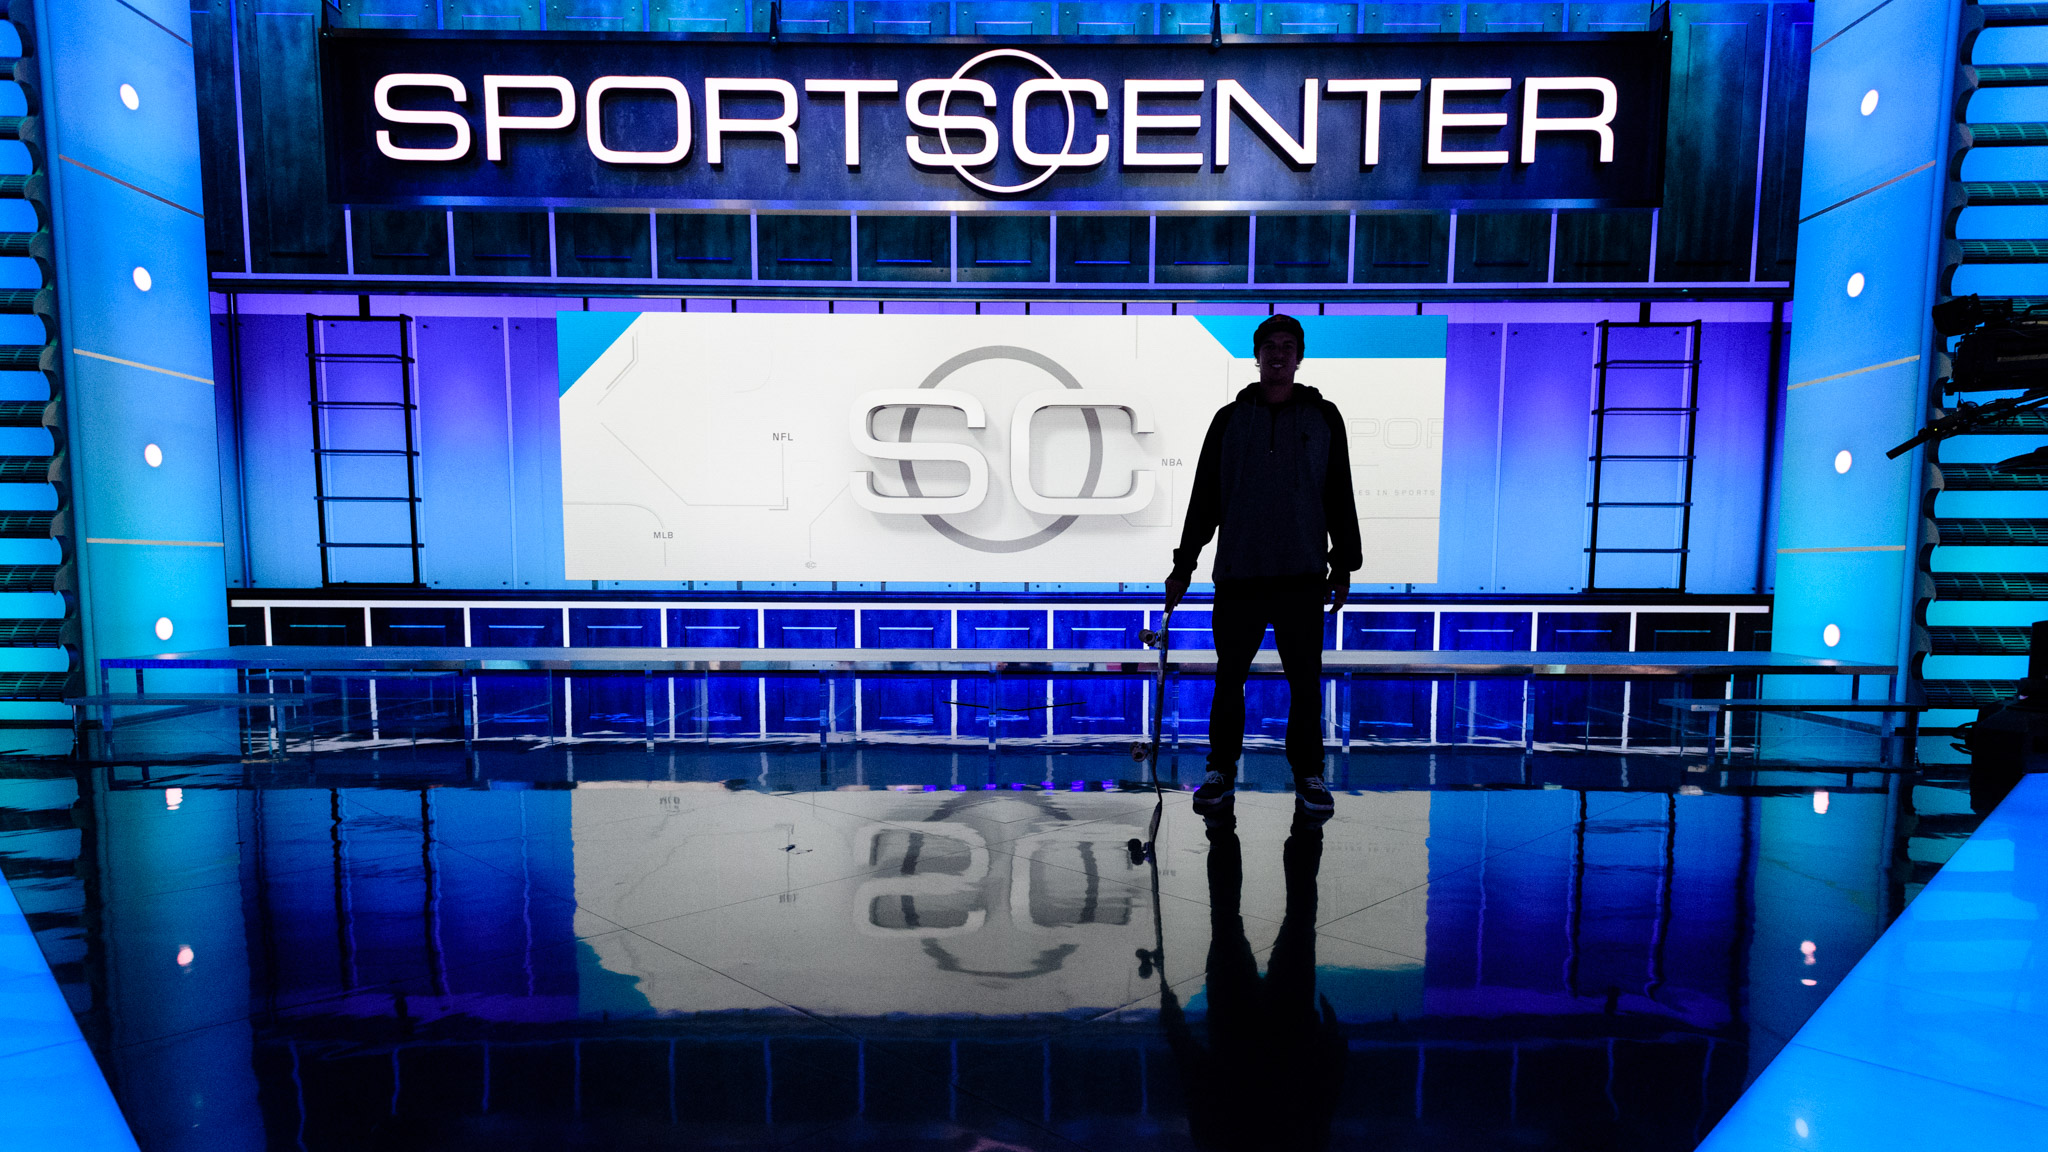 This is SportsCenter